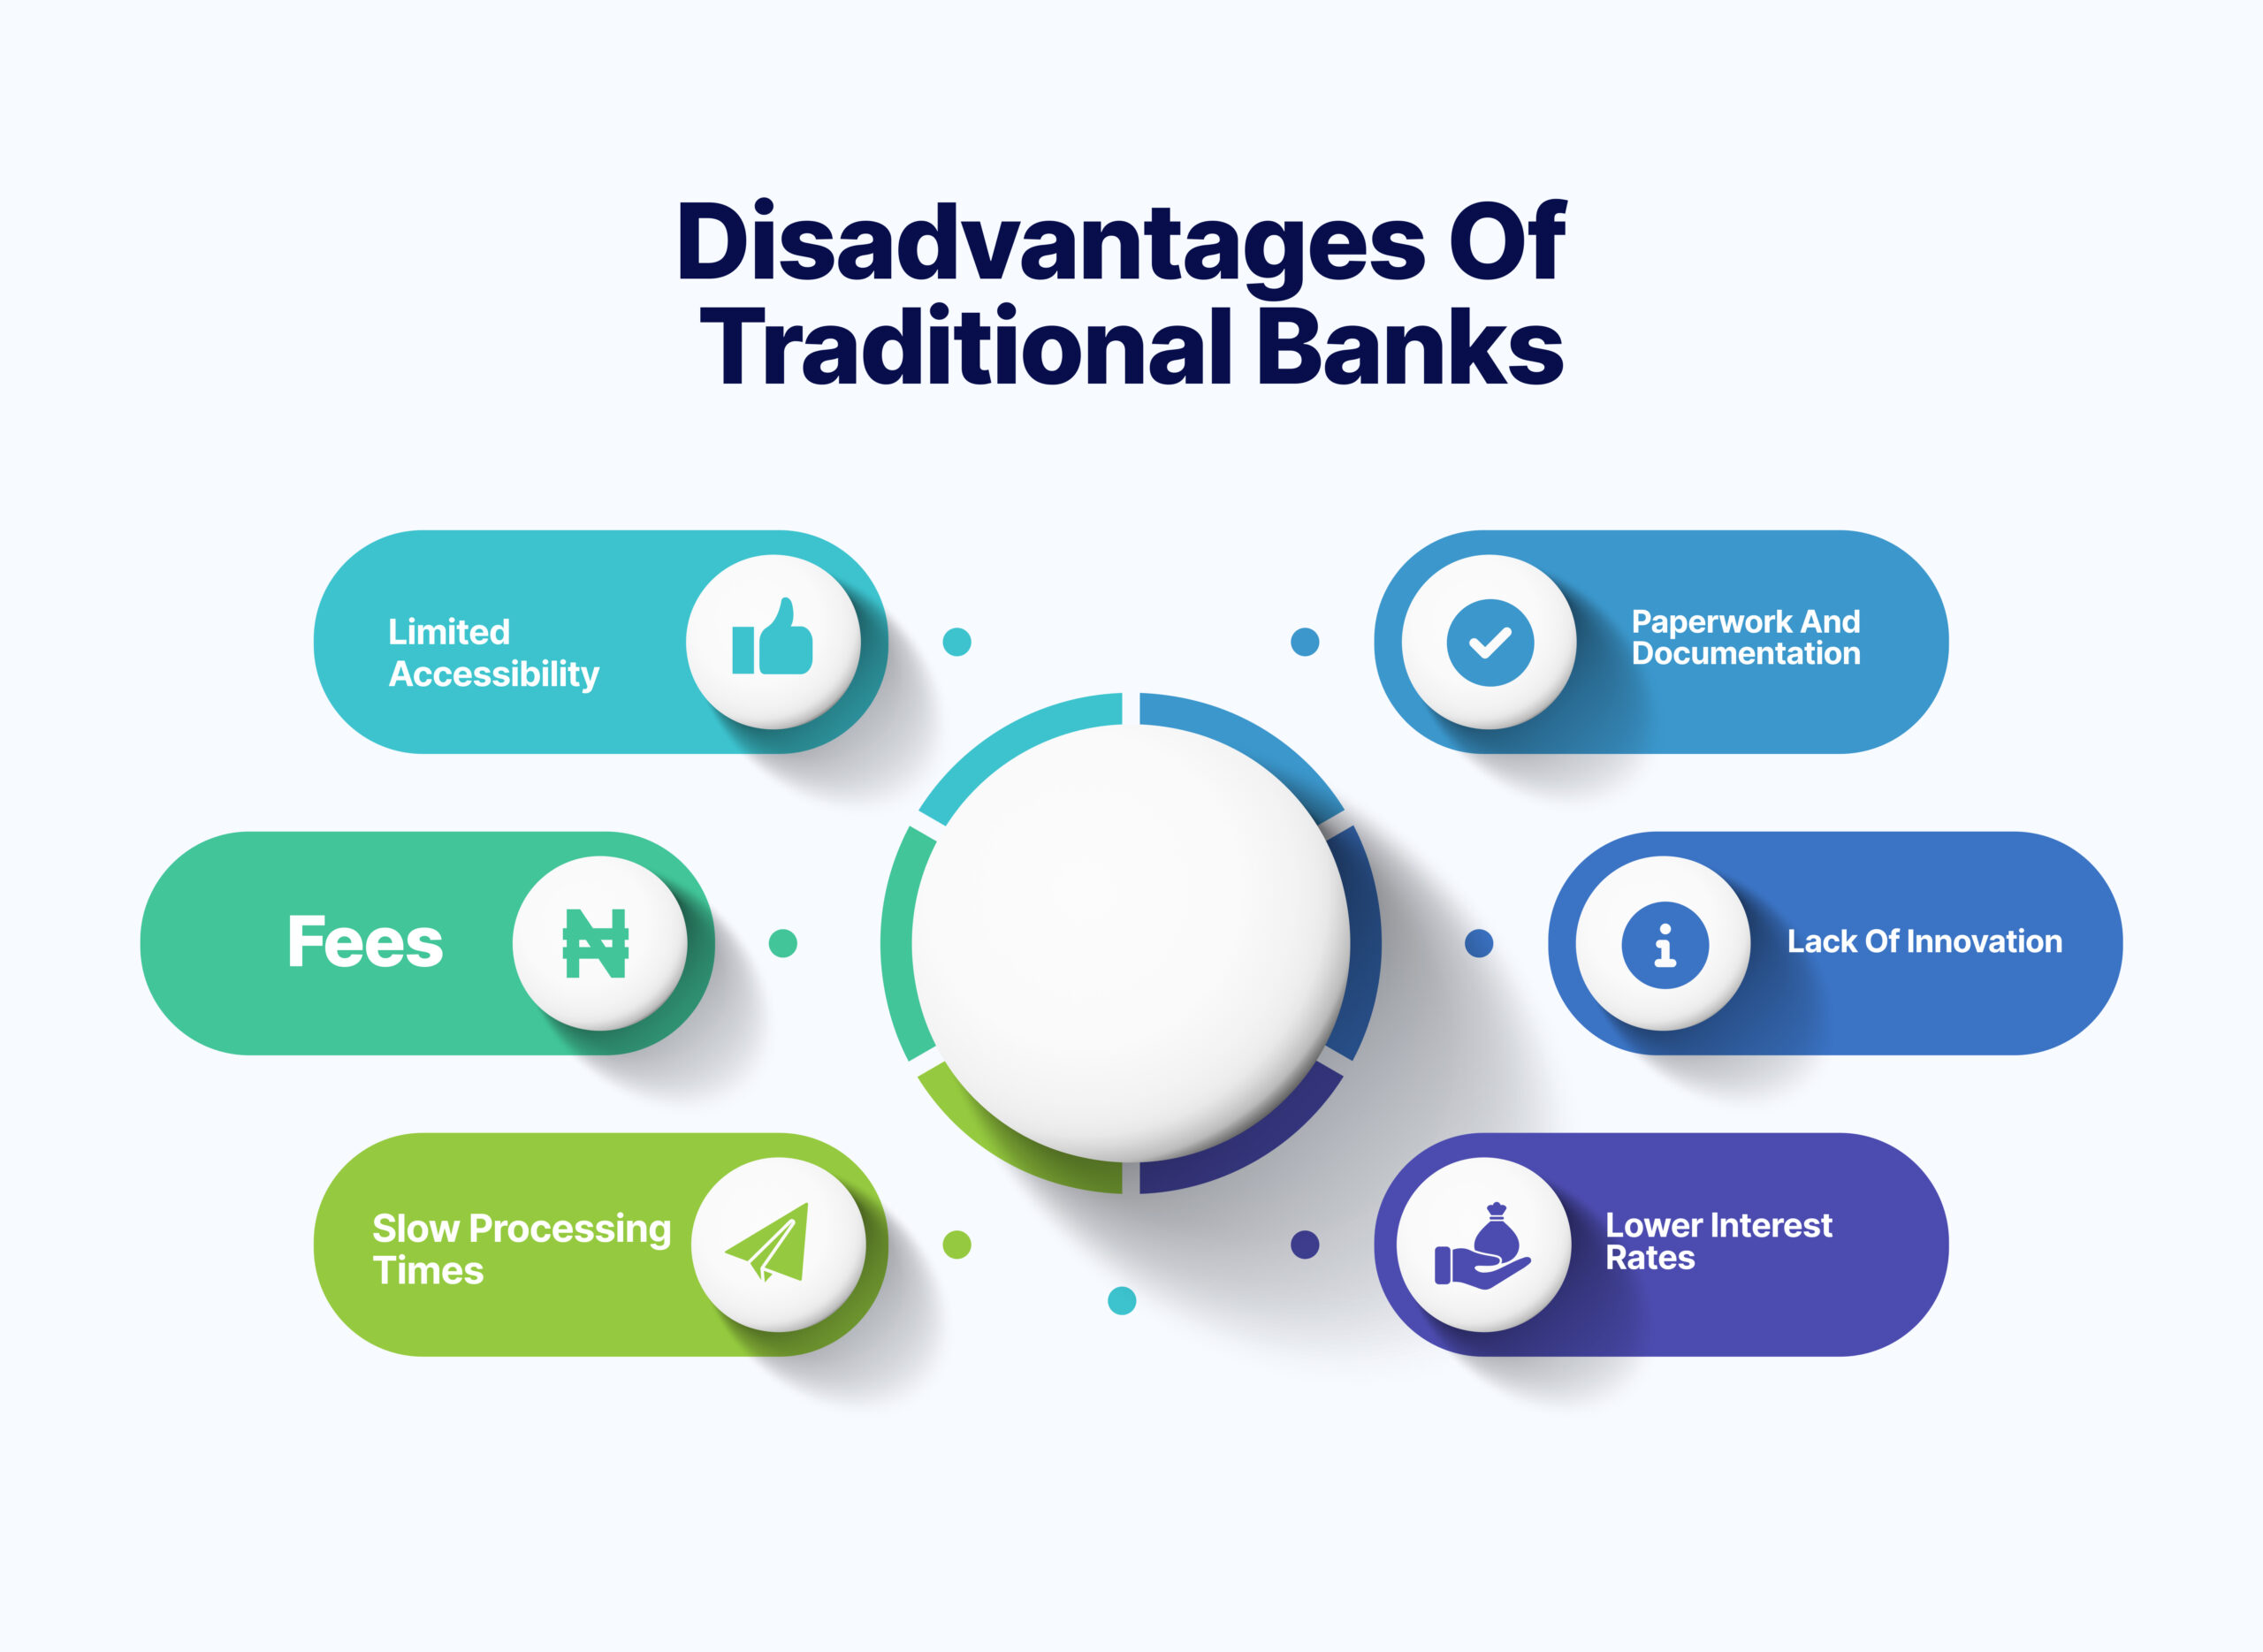 Disadvantages of Traditional Banks